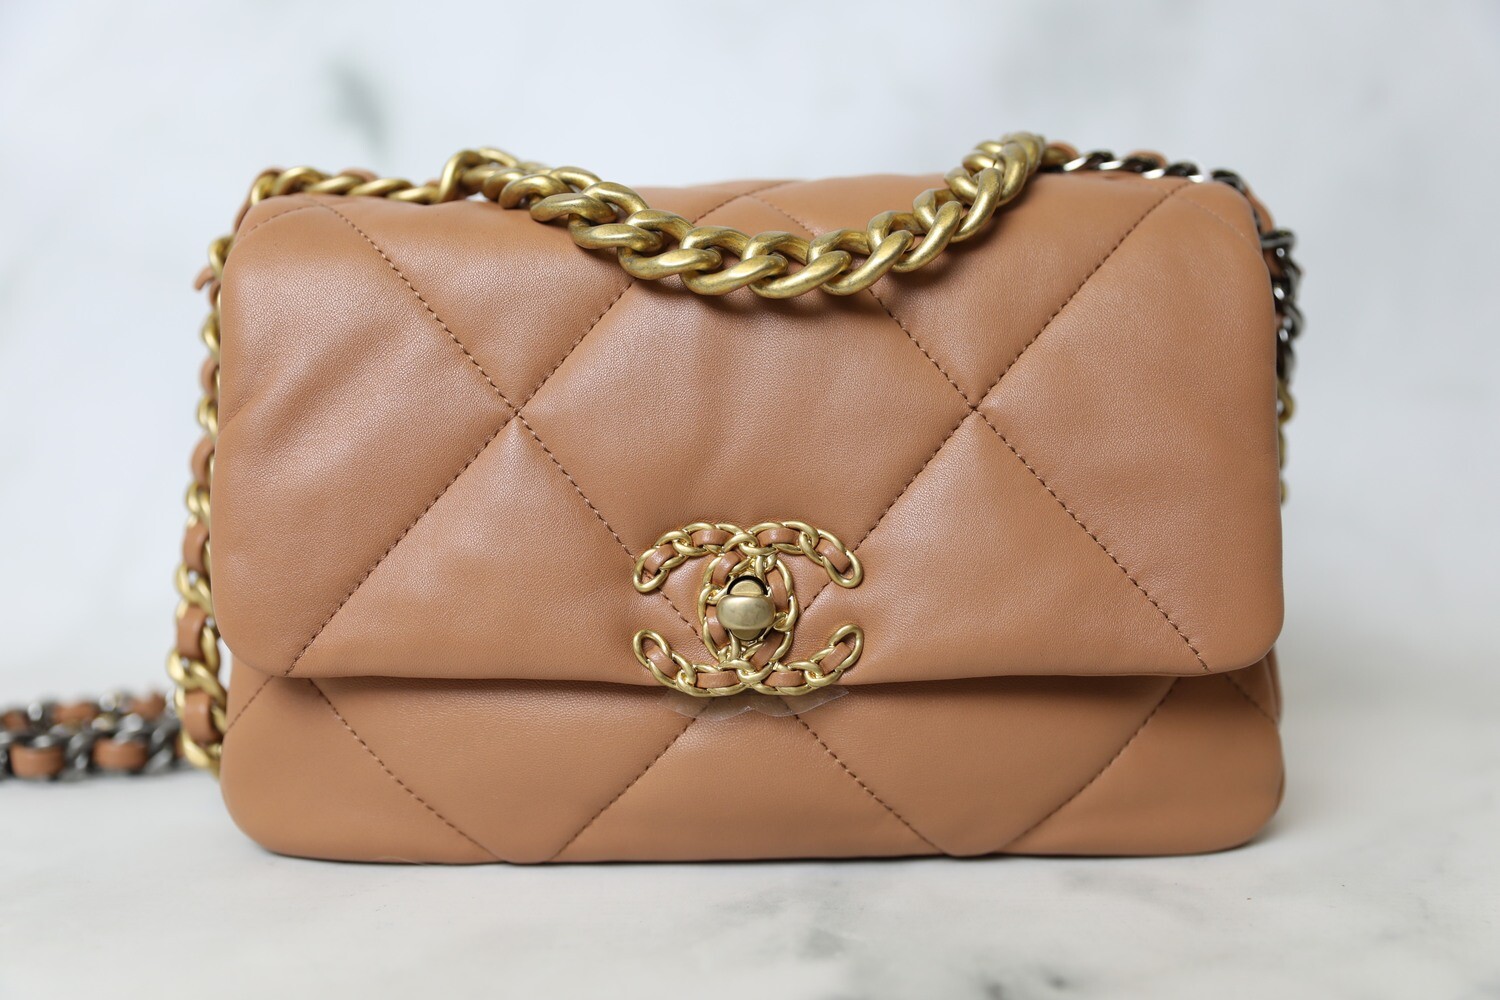 Chanel 19 Small Caramel Leather, Mixed Metal Hardware, New in Box - Julia  Rose Boston